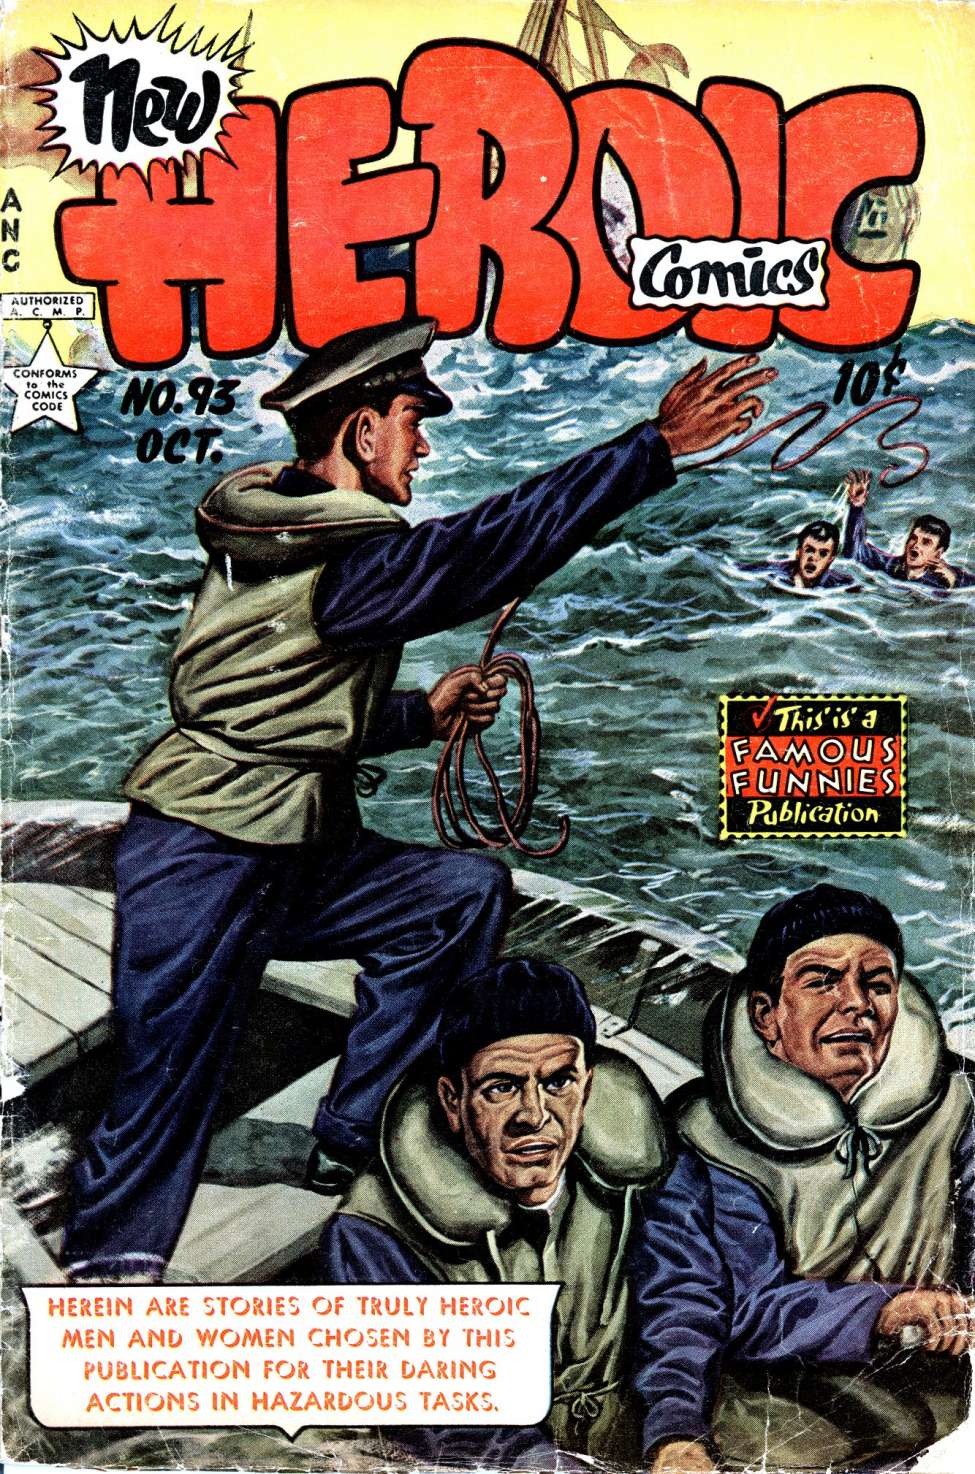 Comic Book Cover For New Heroic Comics 93 - Version 2